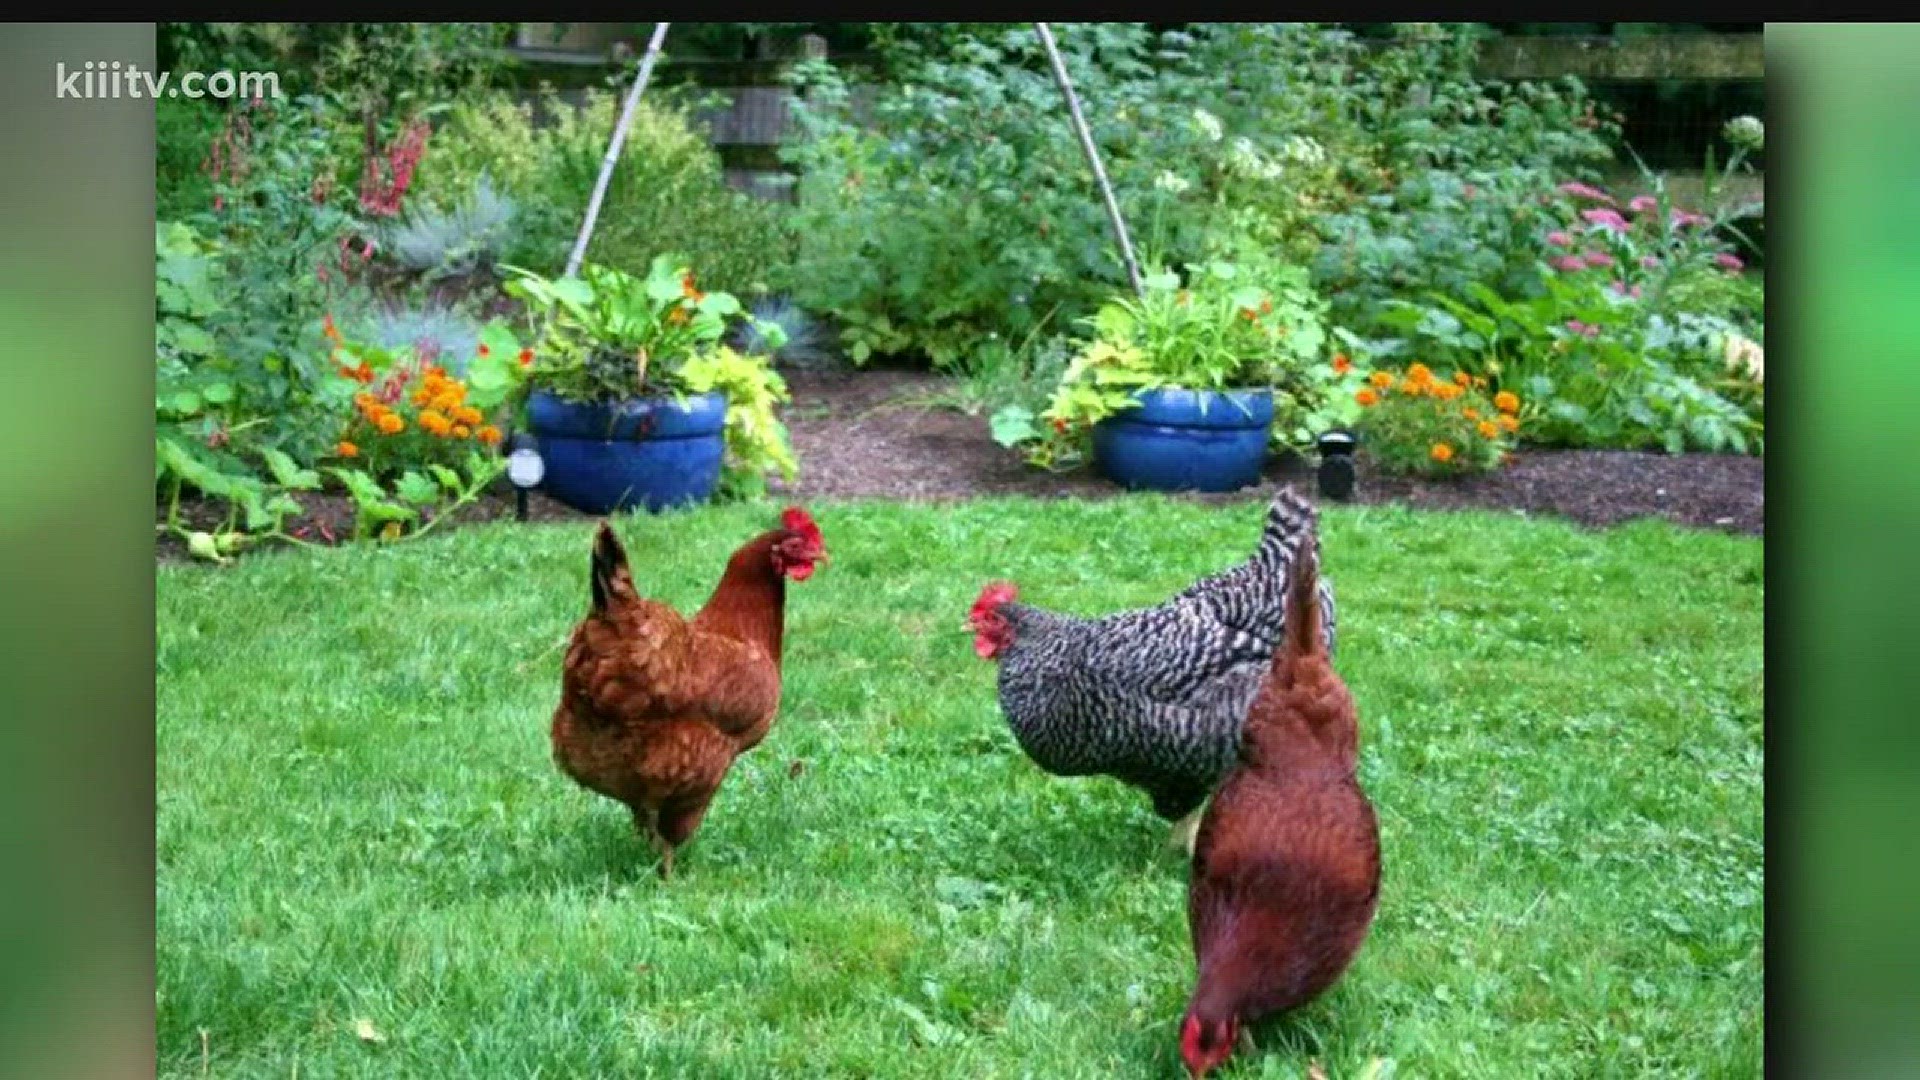 Adding chickens to your garden could bring your plants benefits.